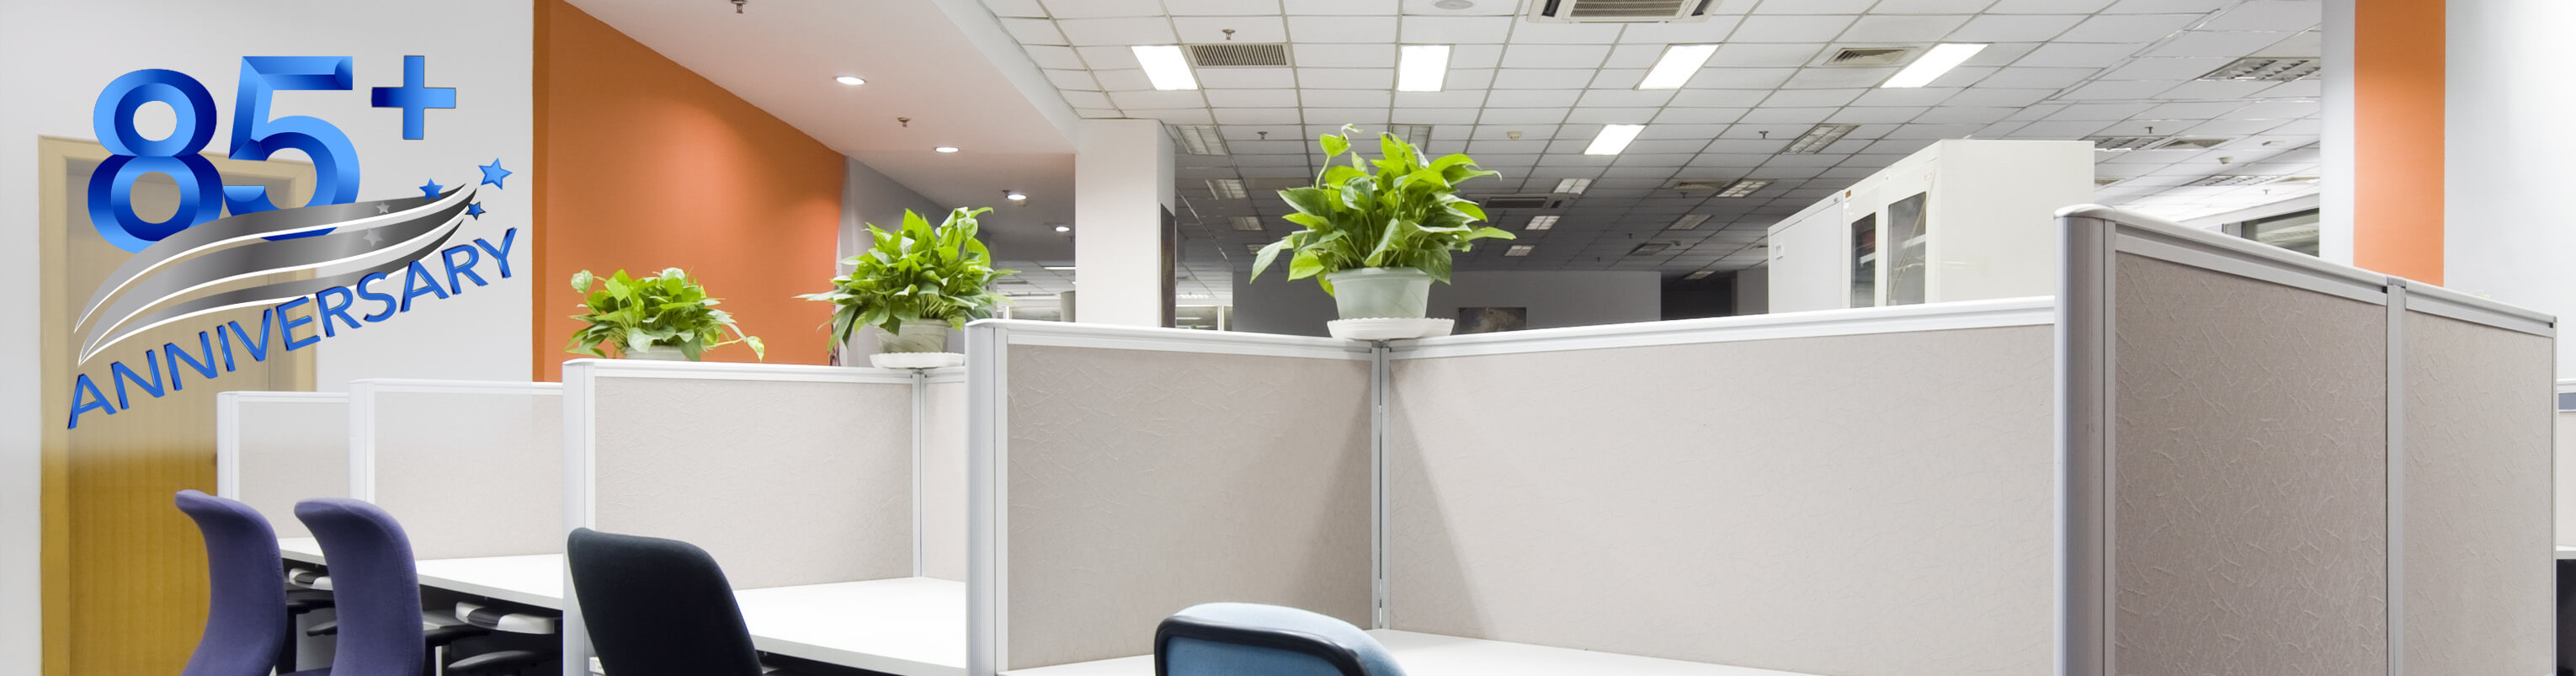 Pierce hvac technicians will recommend the best heating and cooling equipment to keep your office temperature perfect for your employees and your office plants